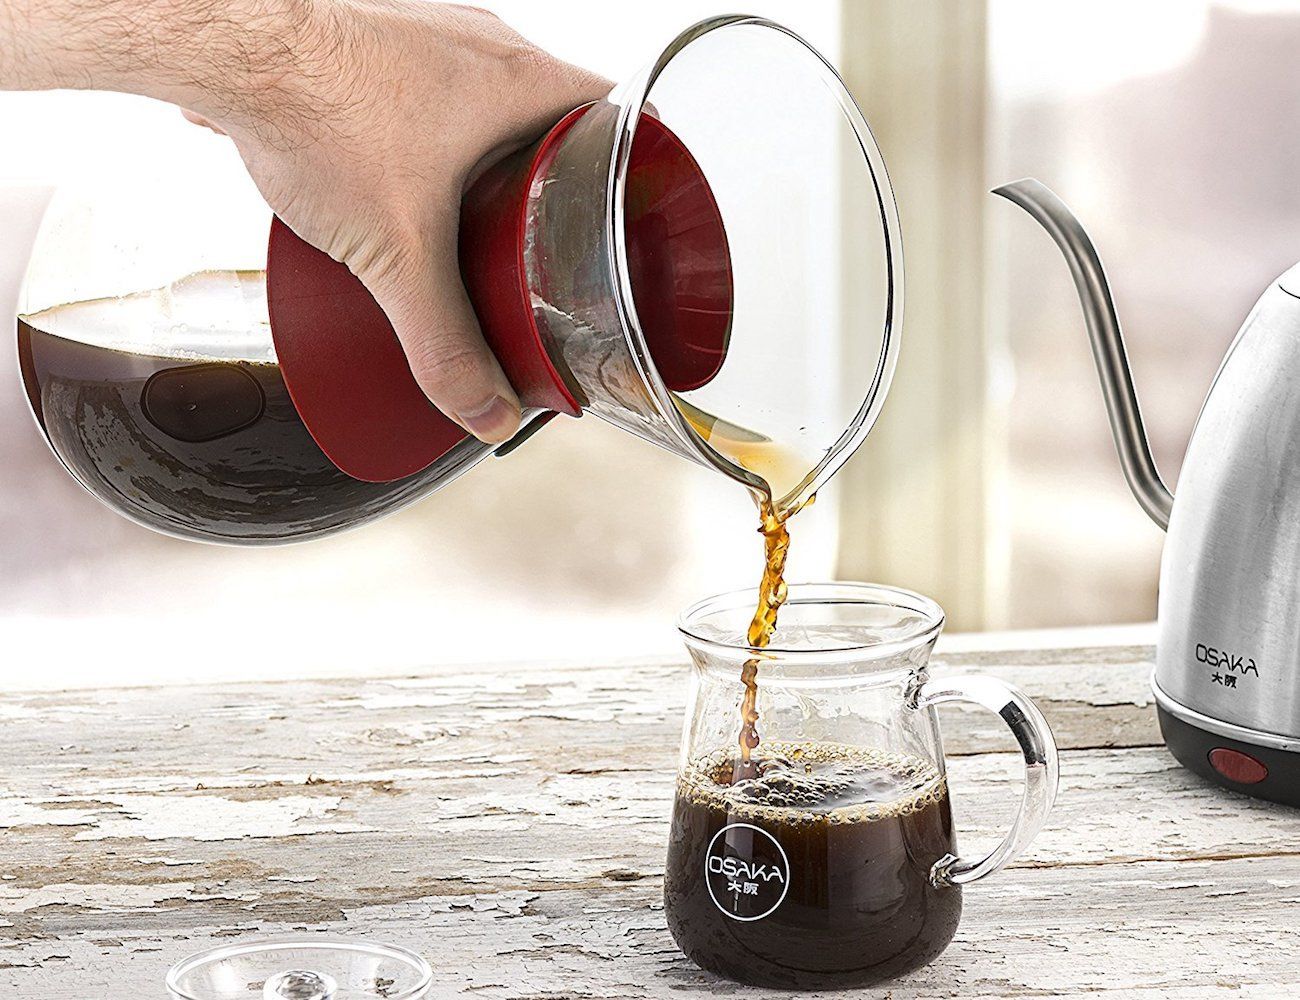 Osaka Pour-Over Drip Brewer